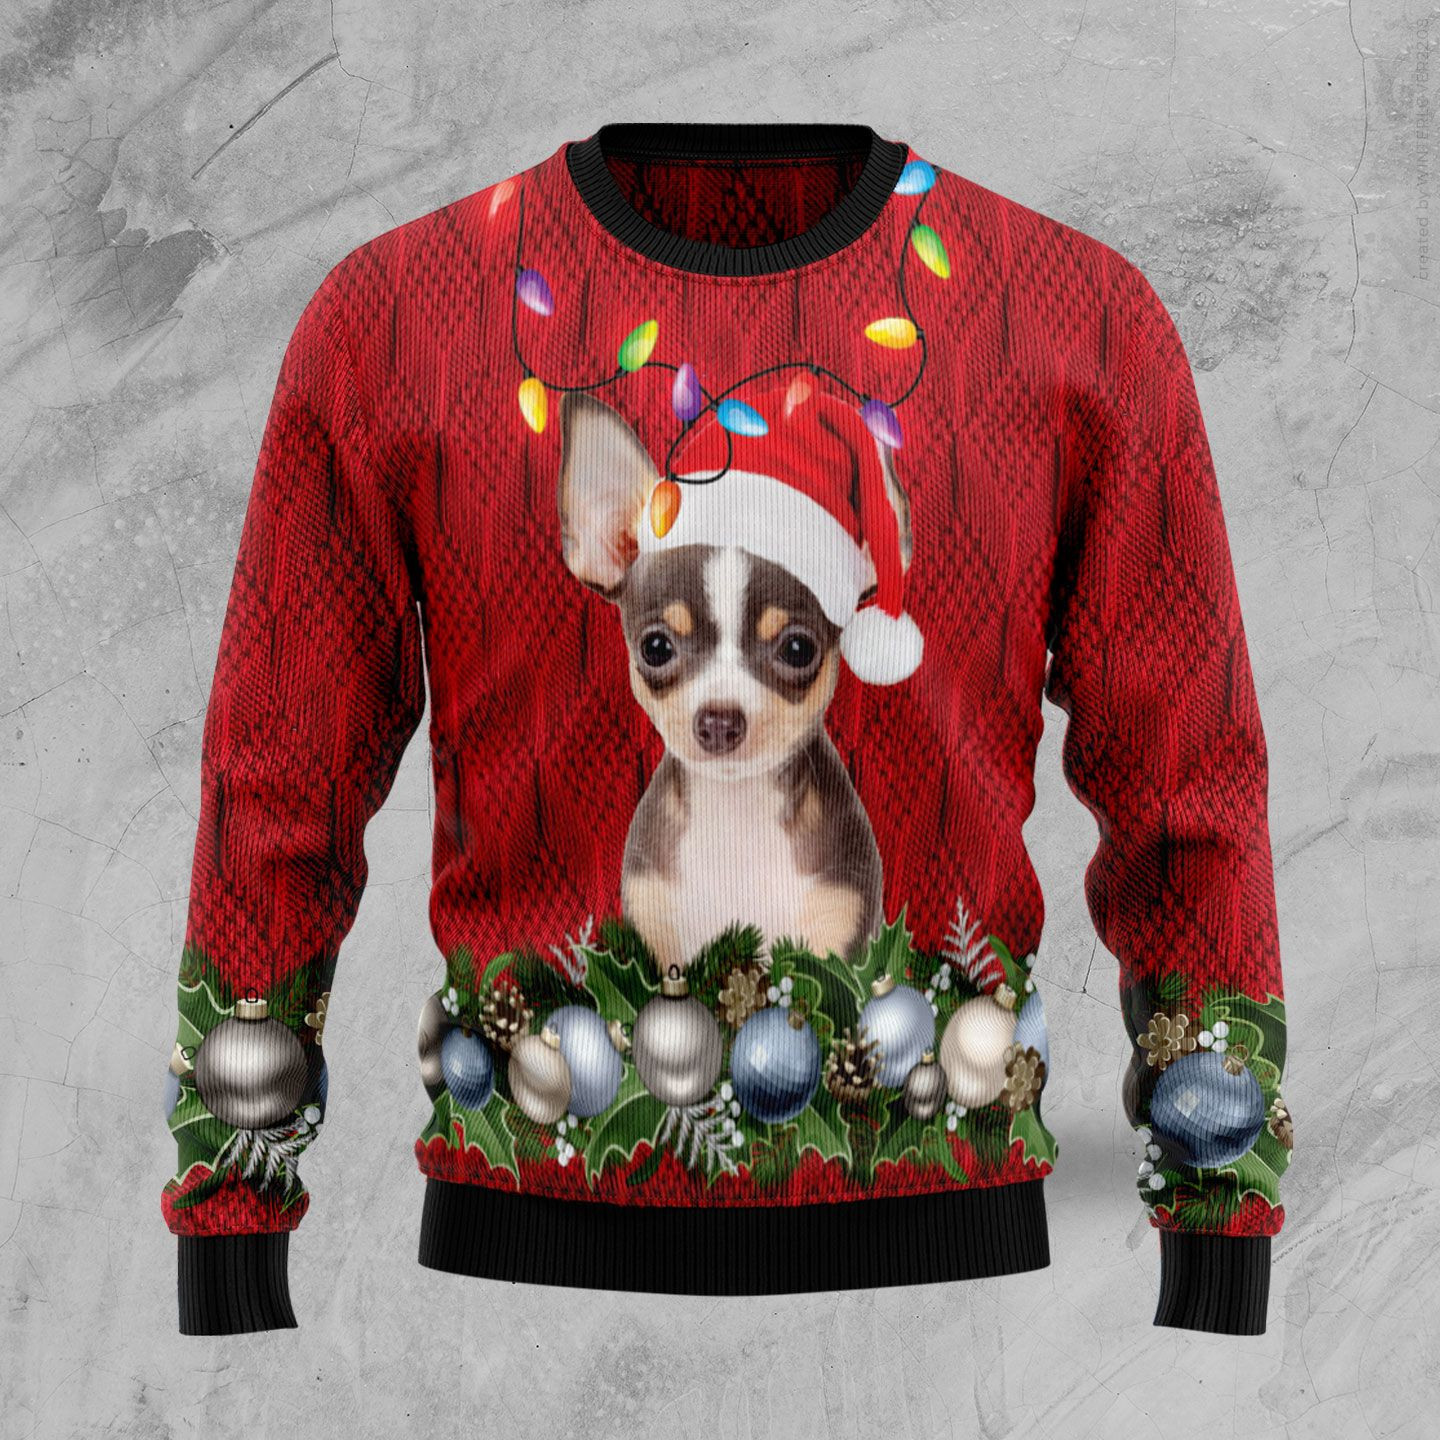 Chihuahua Christmas Beauty Ugly Christmas Sweater Ugly Sweater For Men Women, Holiday Sweater